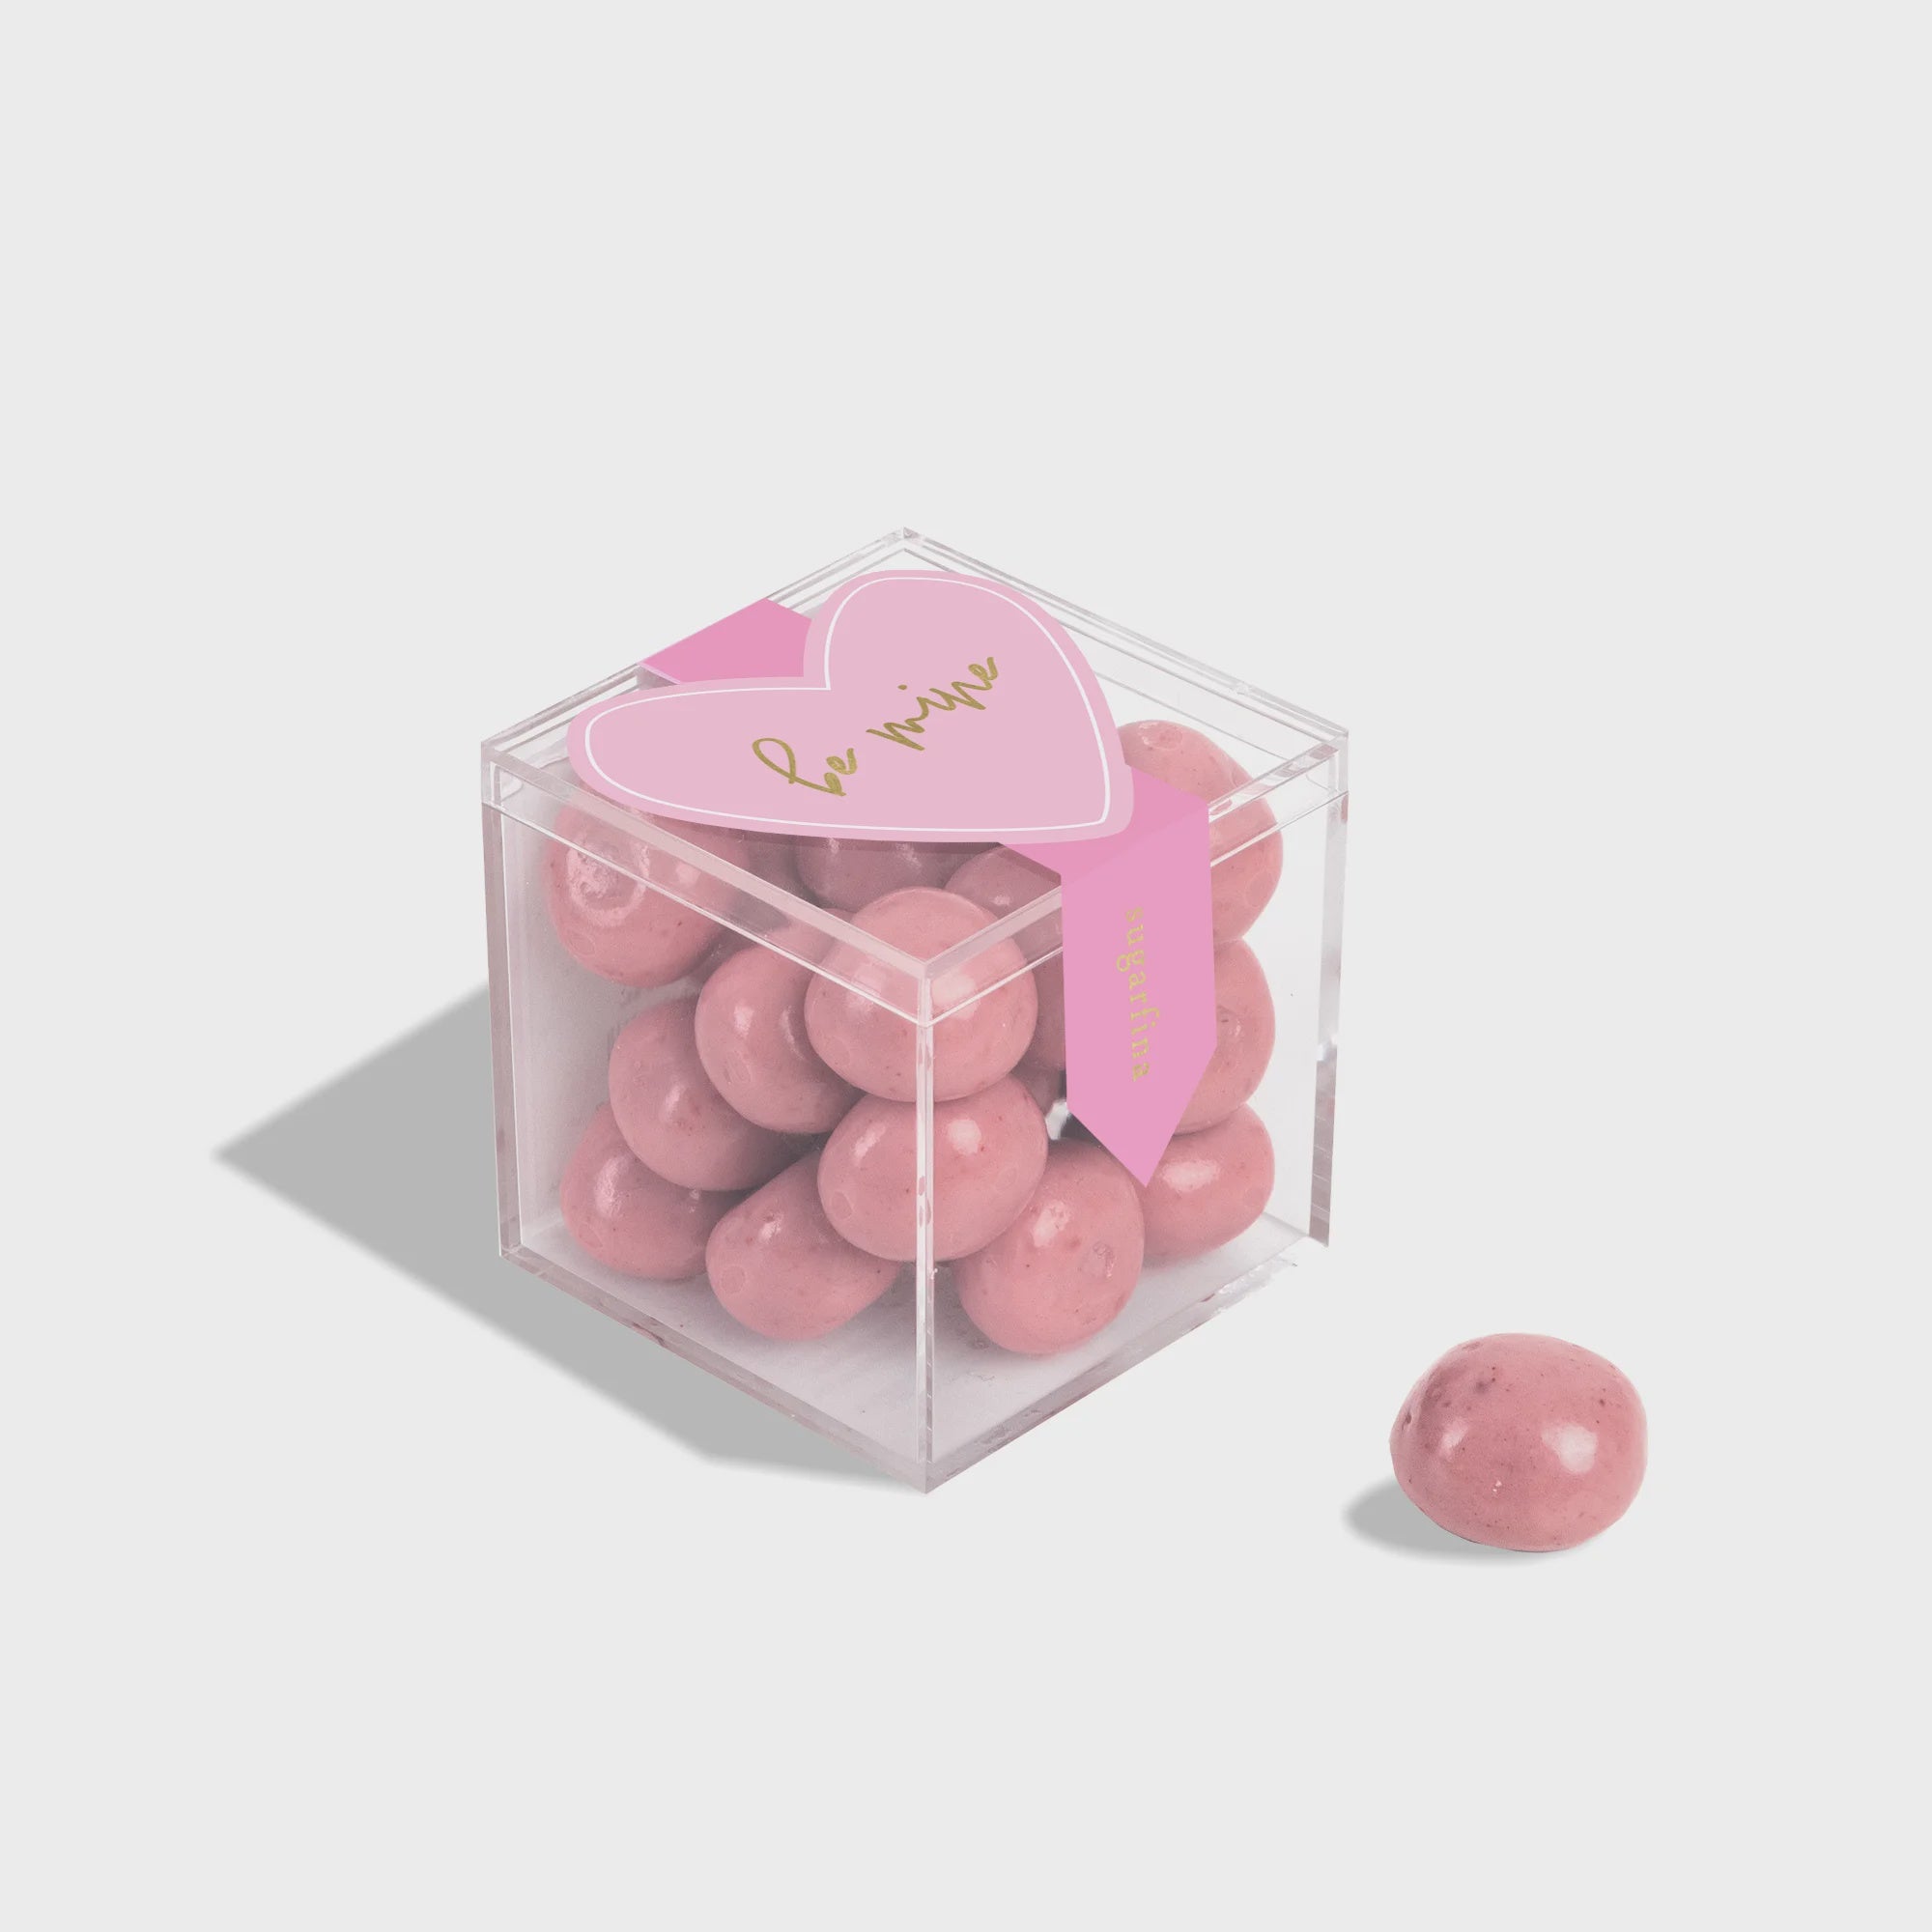 The Be Mine Strawberry Shortbread Cookies by Sugarfina